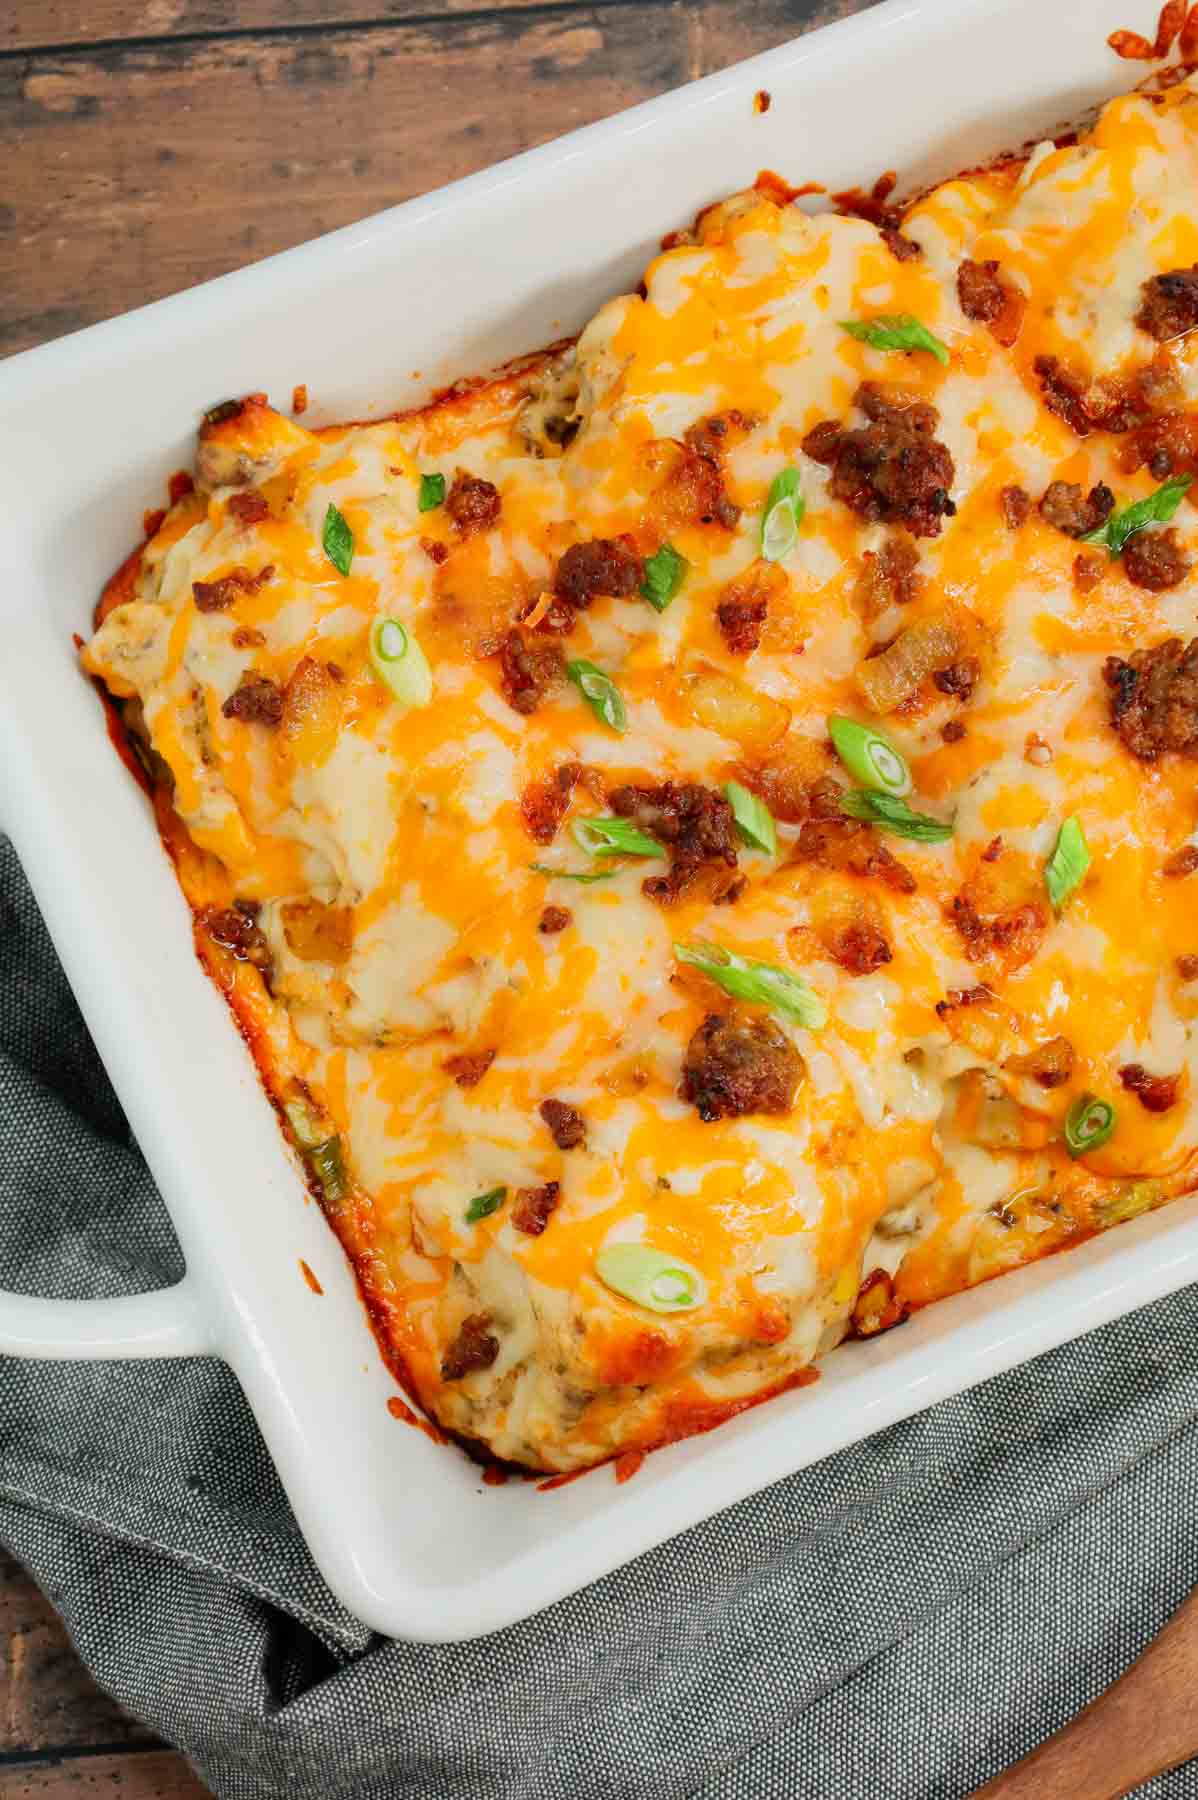 Pierogi Casserole is a hearty dinner recipe loaded with crumbled Italian sausage, onions, three cheese pierogies, cream cheese, Alfredo sauce, shredded mozzarella and cheddar cheese.